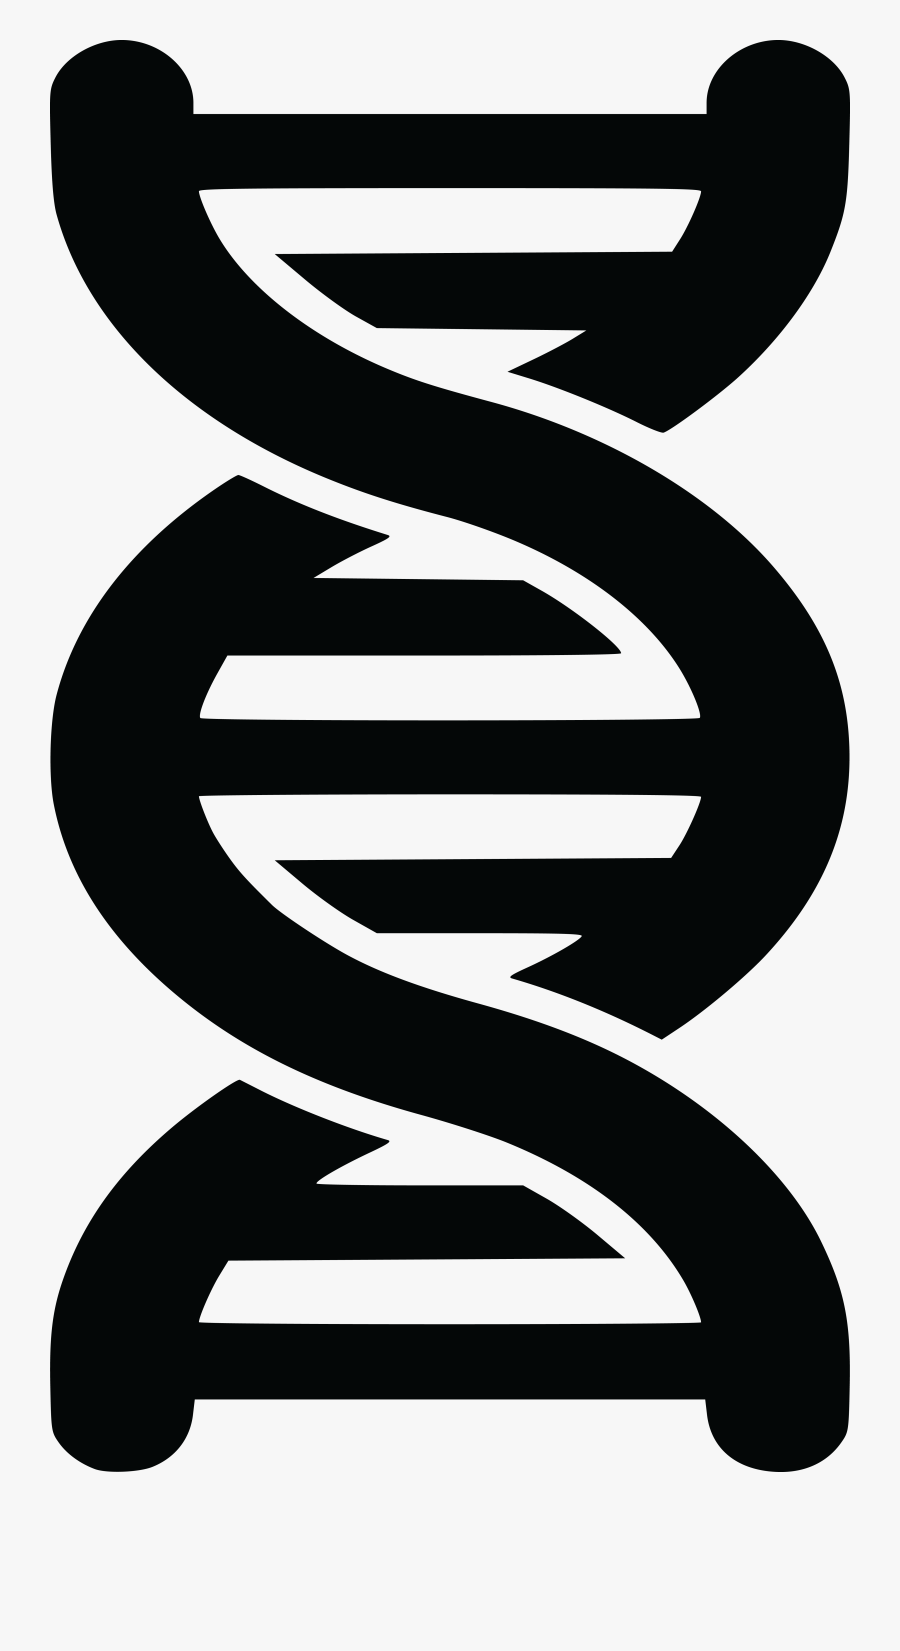 Free Clipart Of A Black And White Dna Strand Double - Dna Clipart Black And White, Transparent Clipart